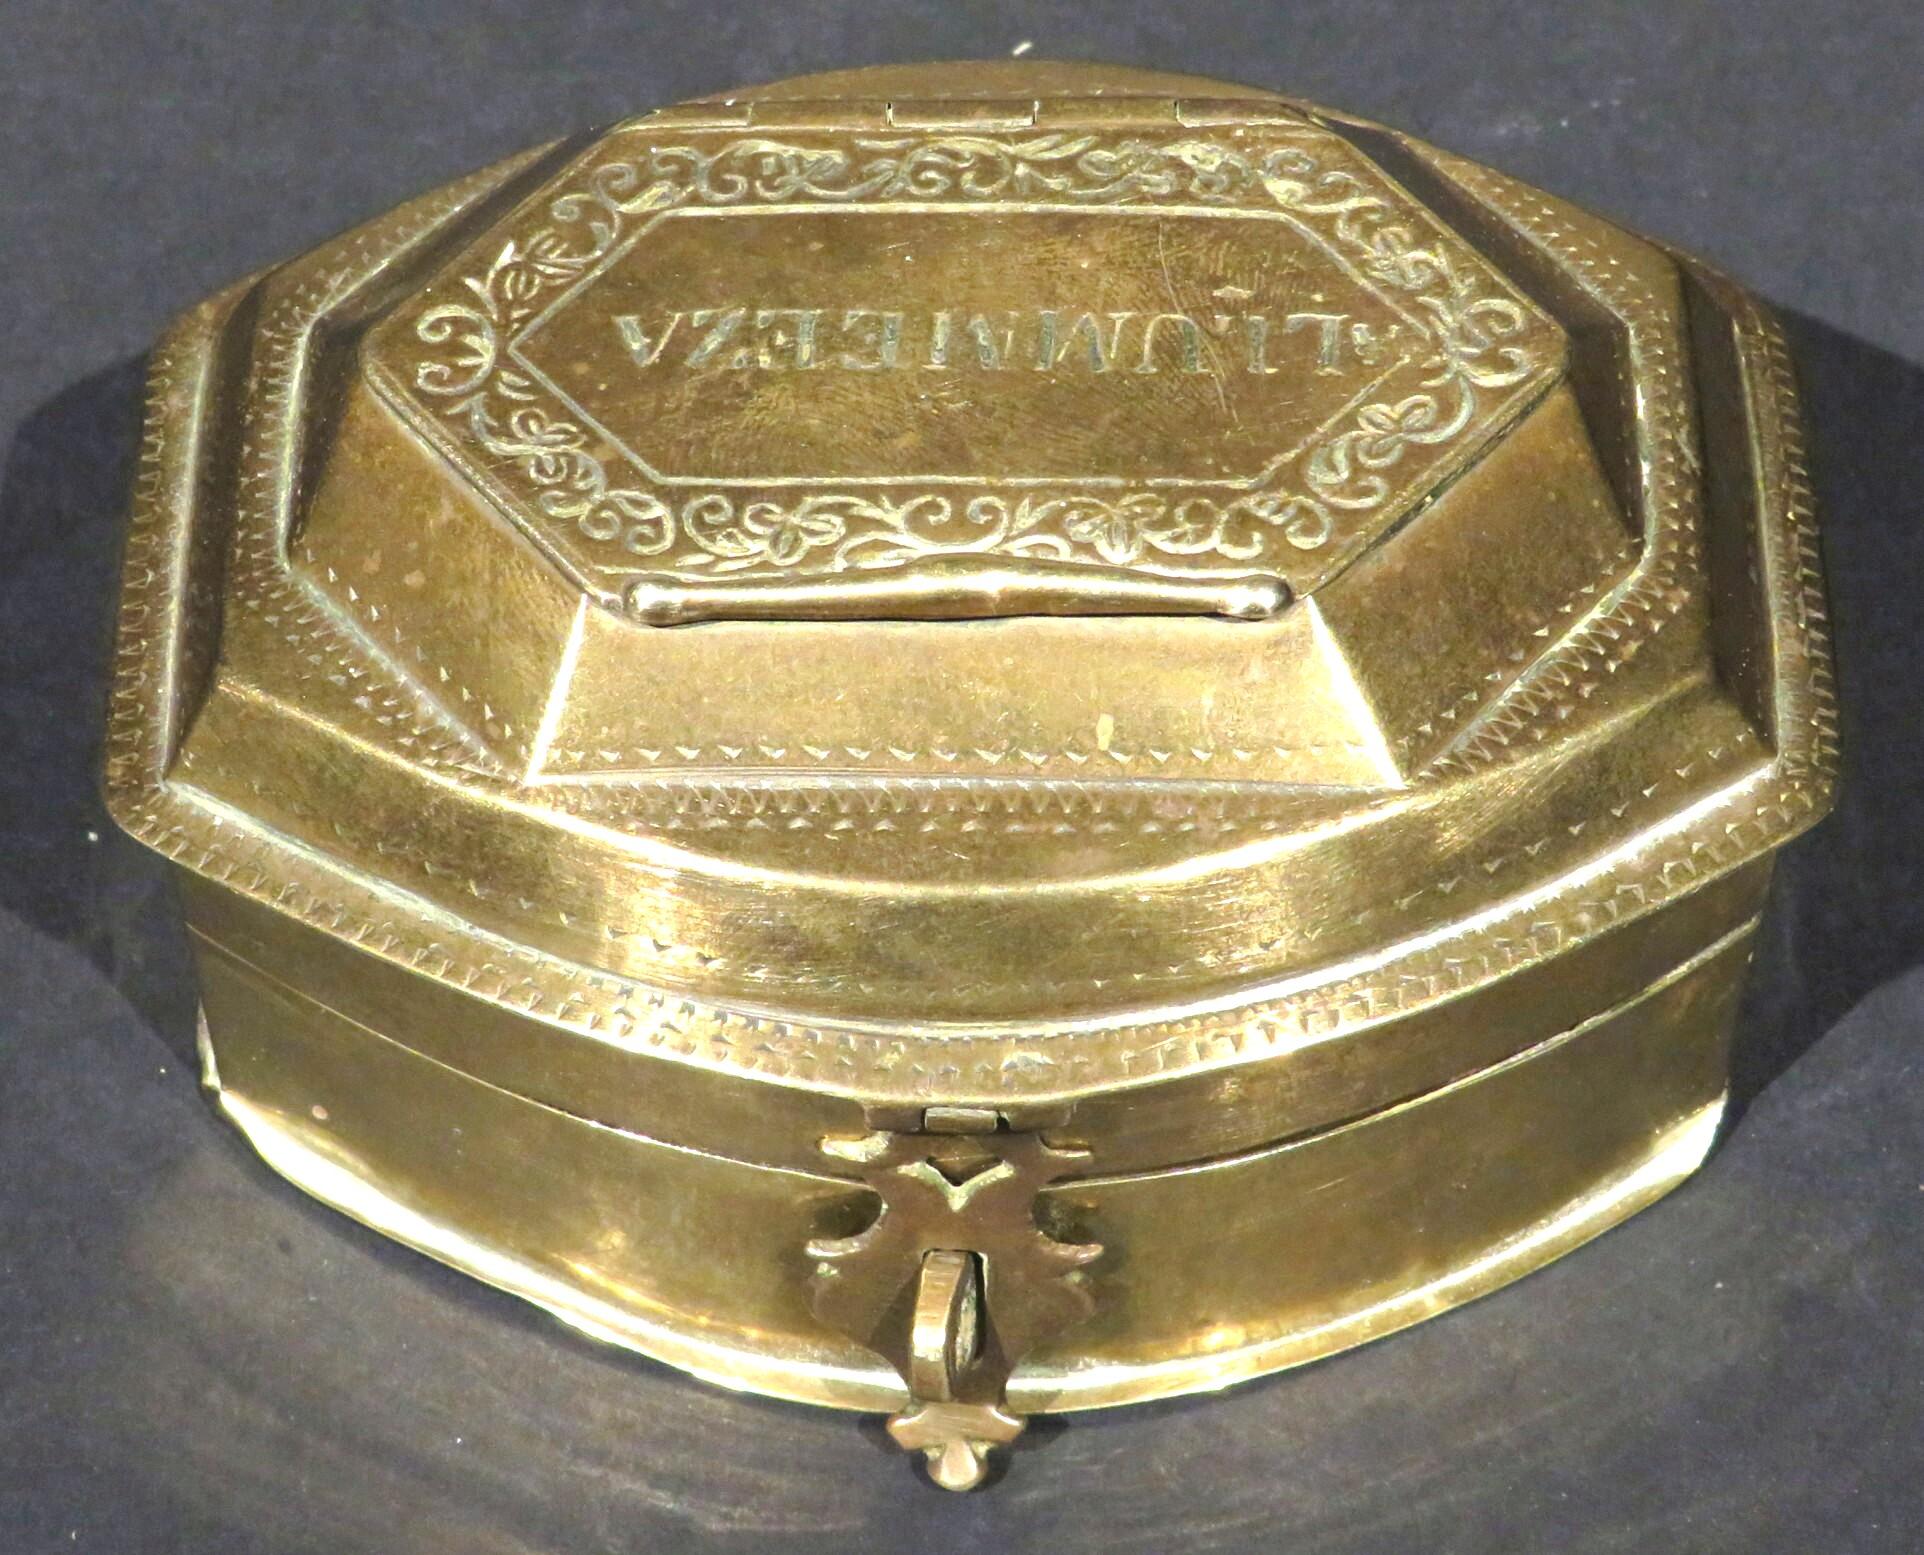 The brass body showing a hinged lid rising up to a faceted receptacle with an engraved  hinged cover, overtop a hinged open compartment which then lifts to reveal an interior fitted with four small compartments surrounding a central compartment with